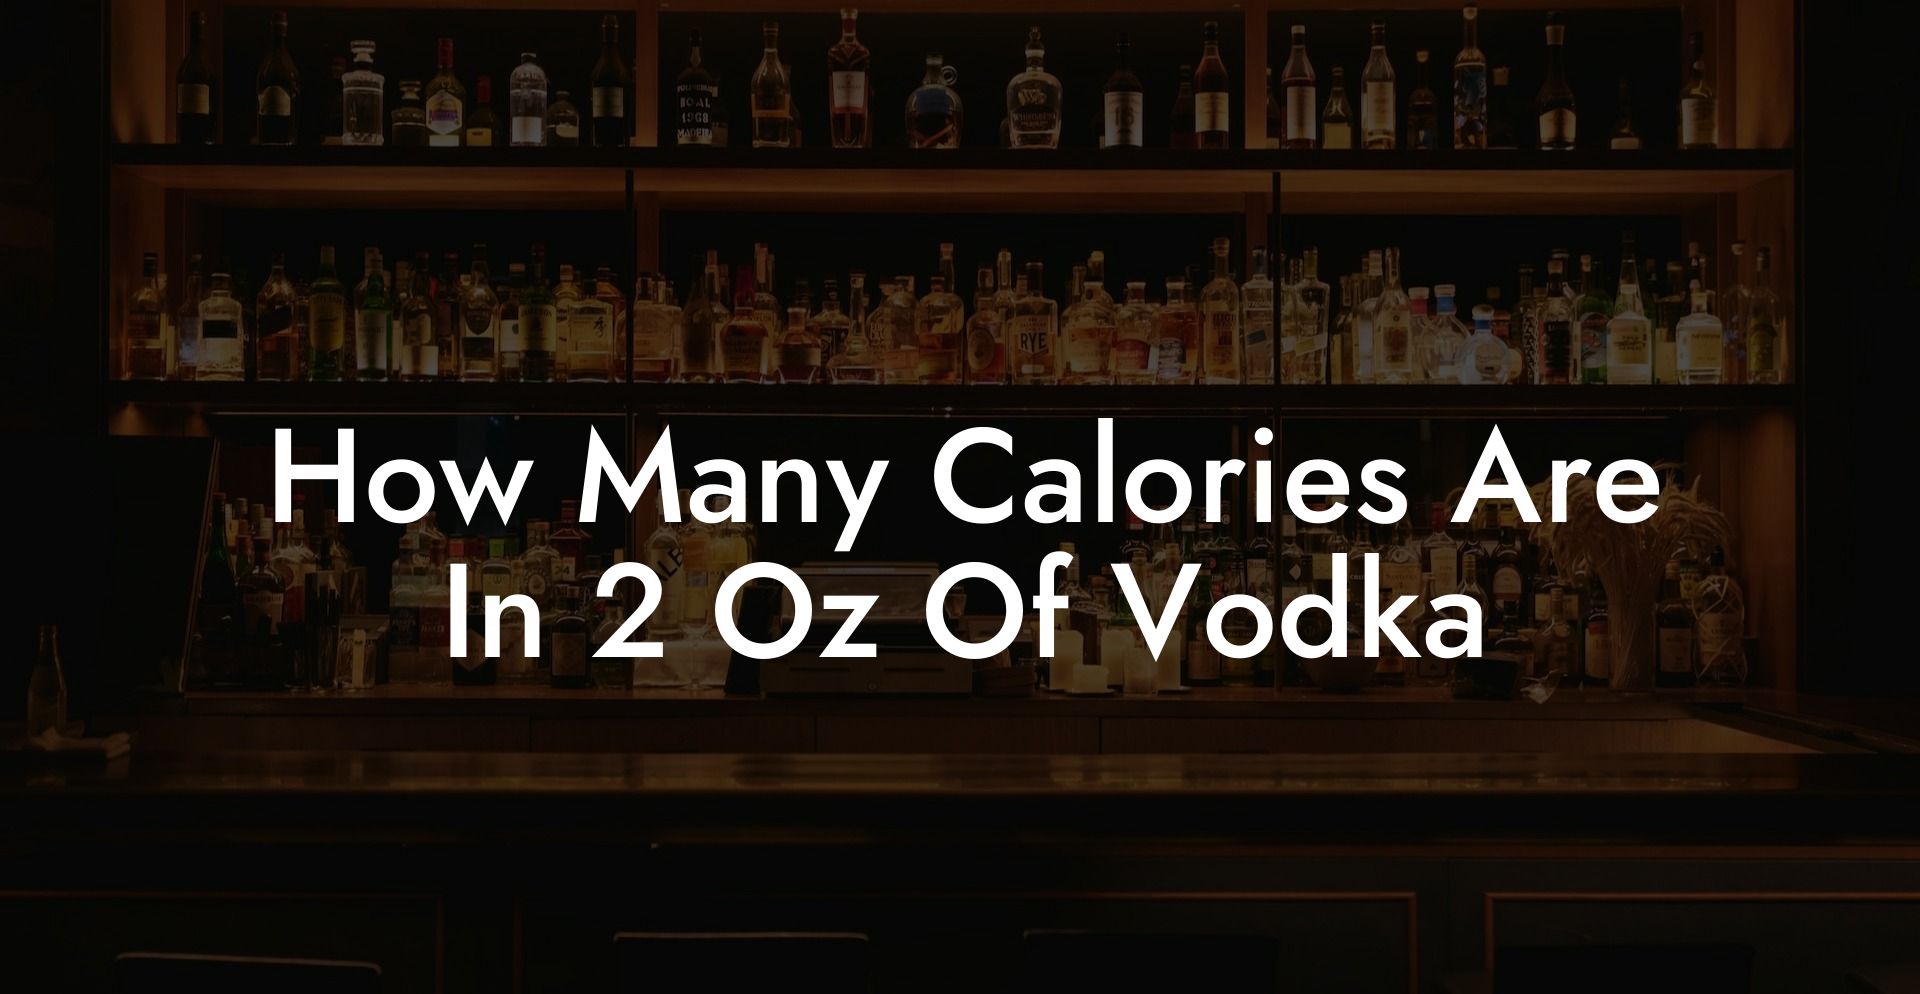 How Many Calories Are In 2 Oz Of Vodka